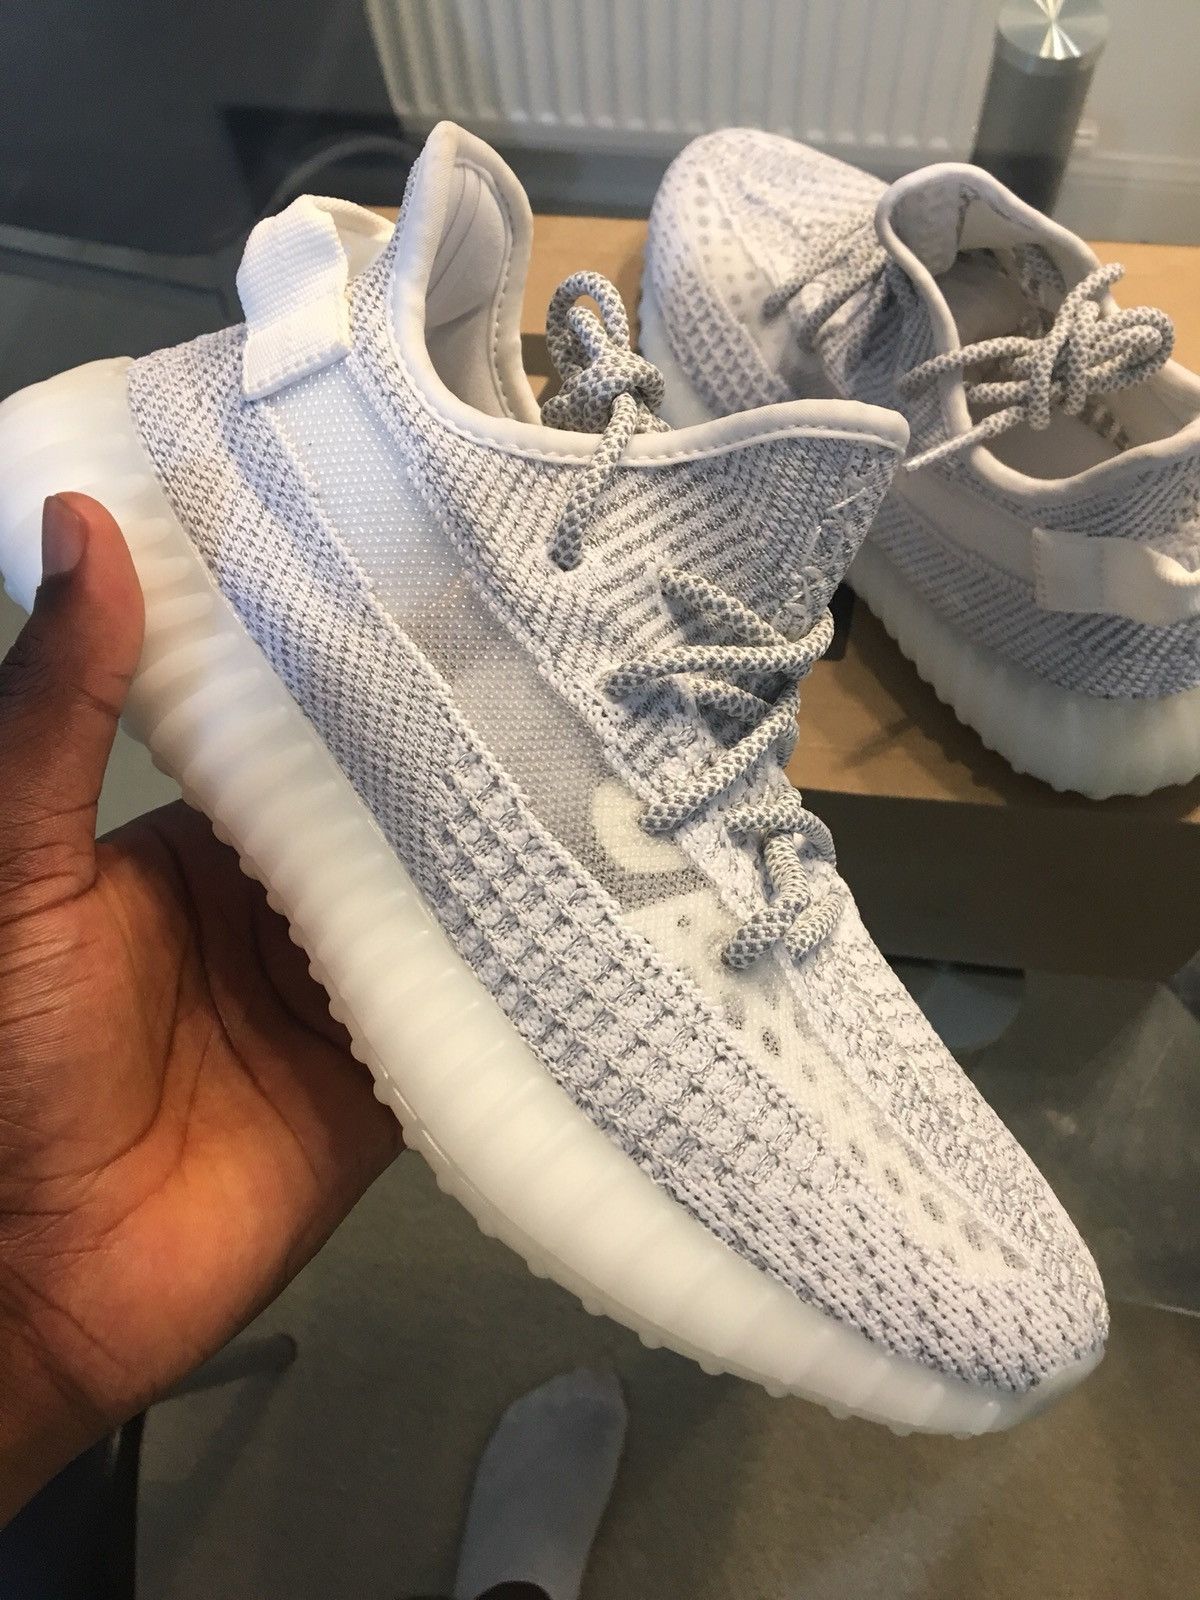 Adidas Yeezy Boost Static Reflective 3M | Grailed